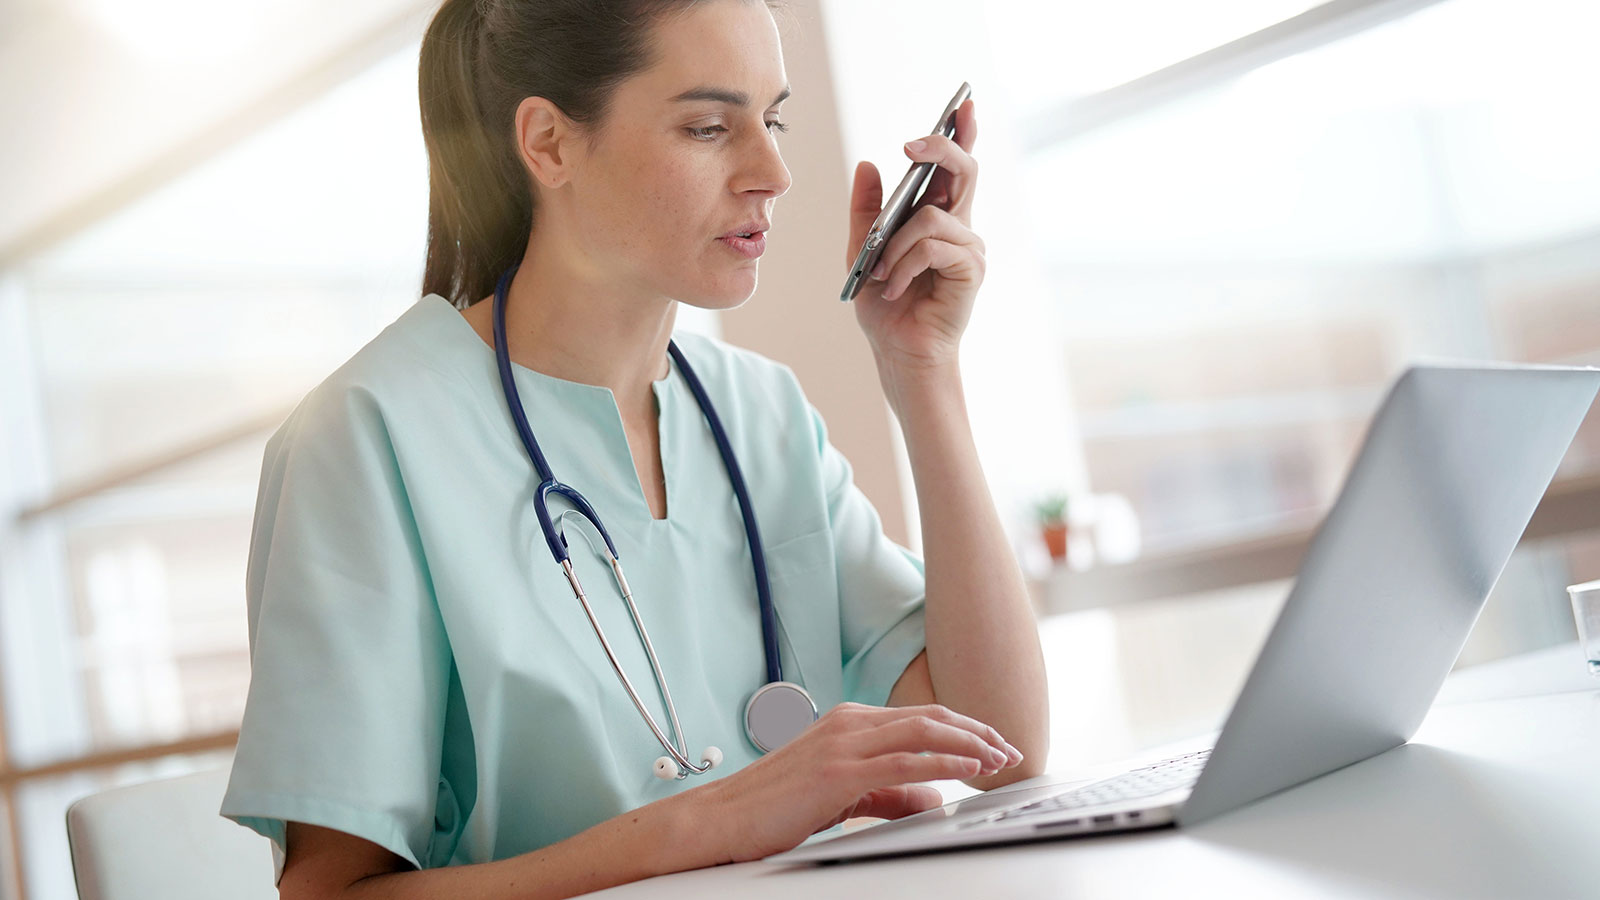 Remote care: technology is developing rapidly